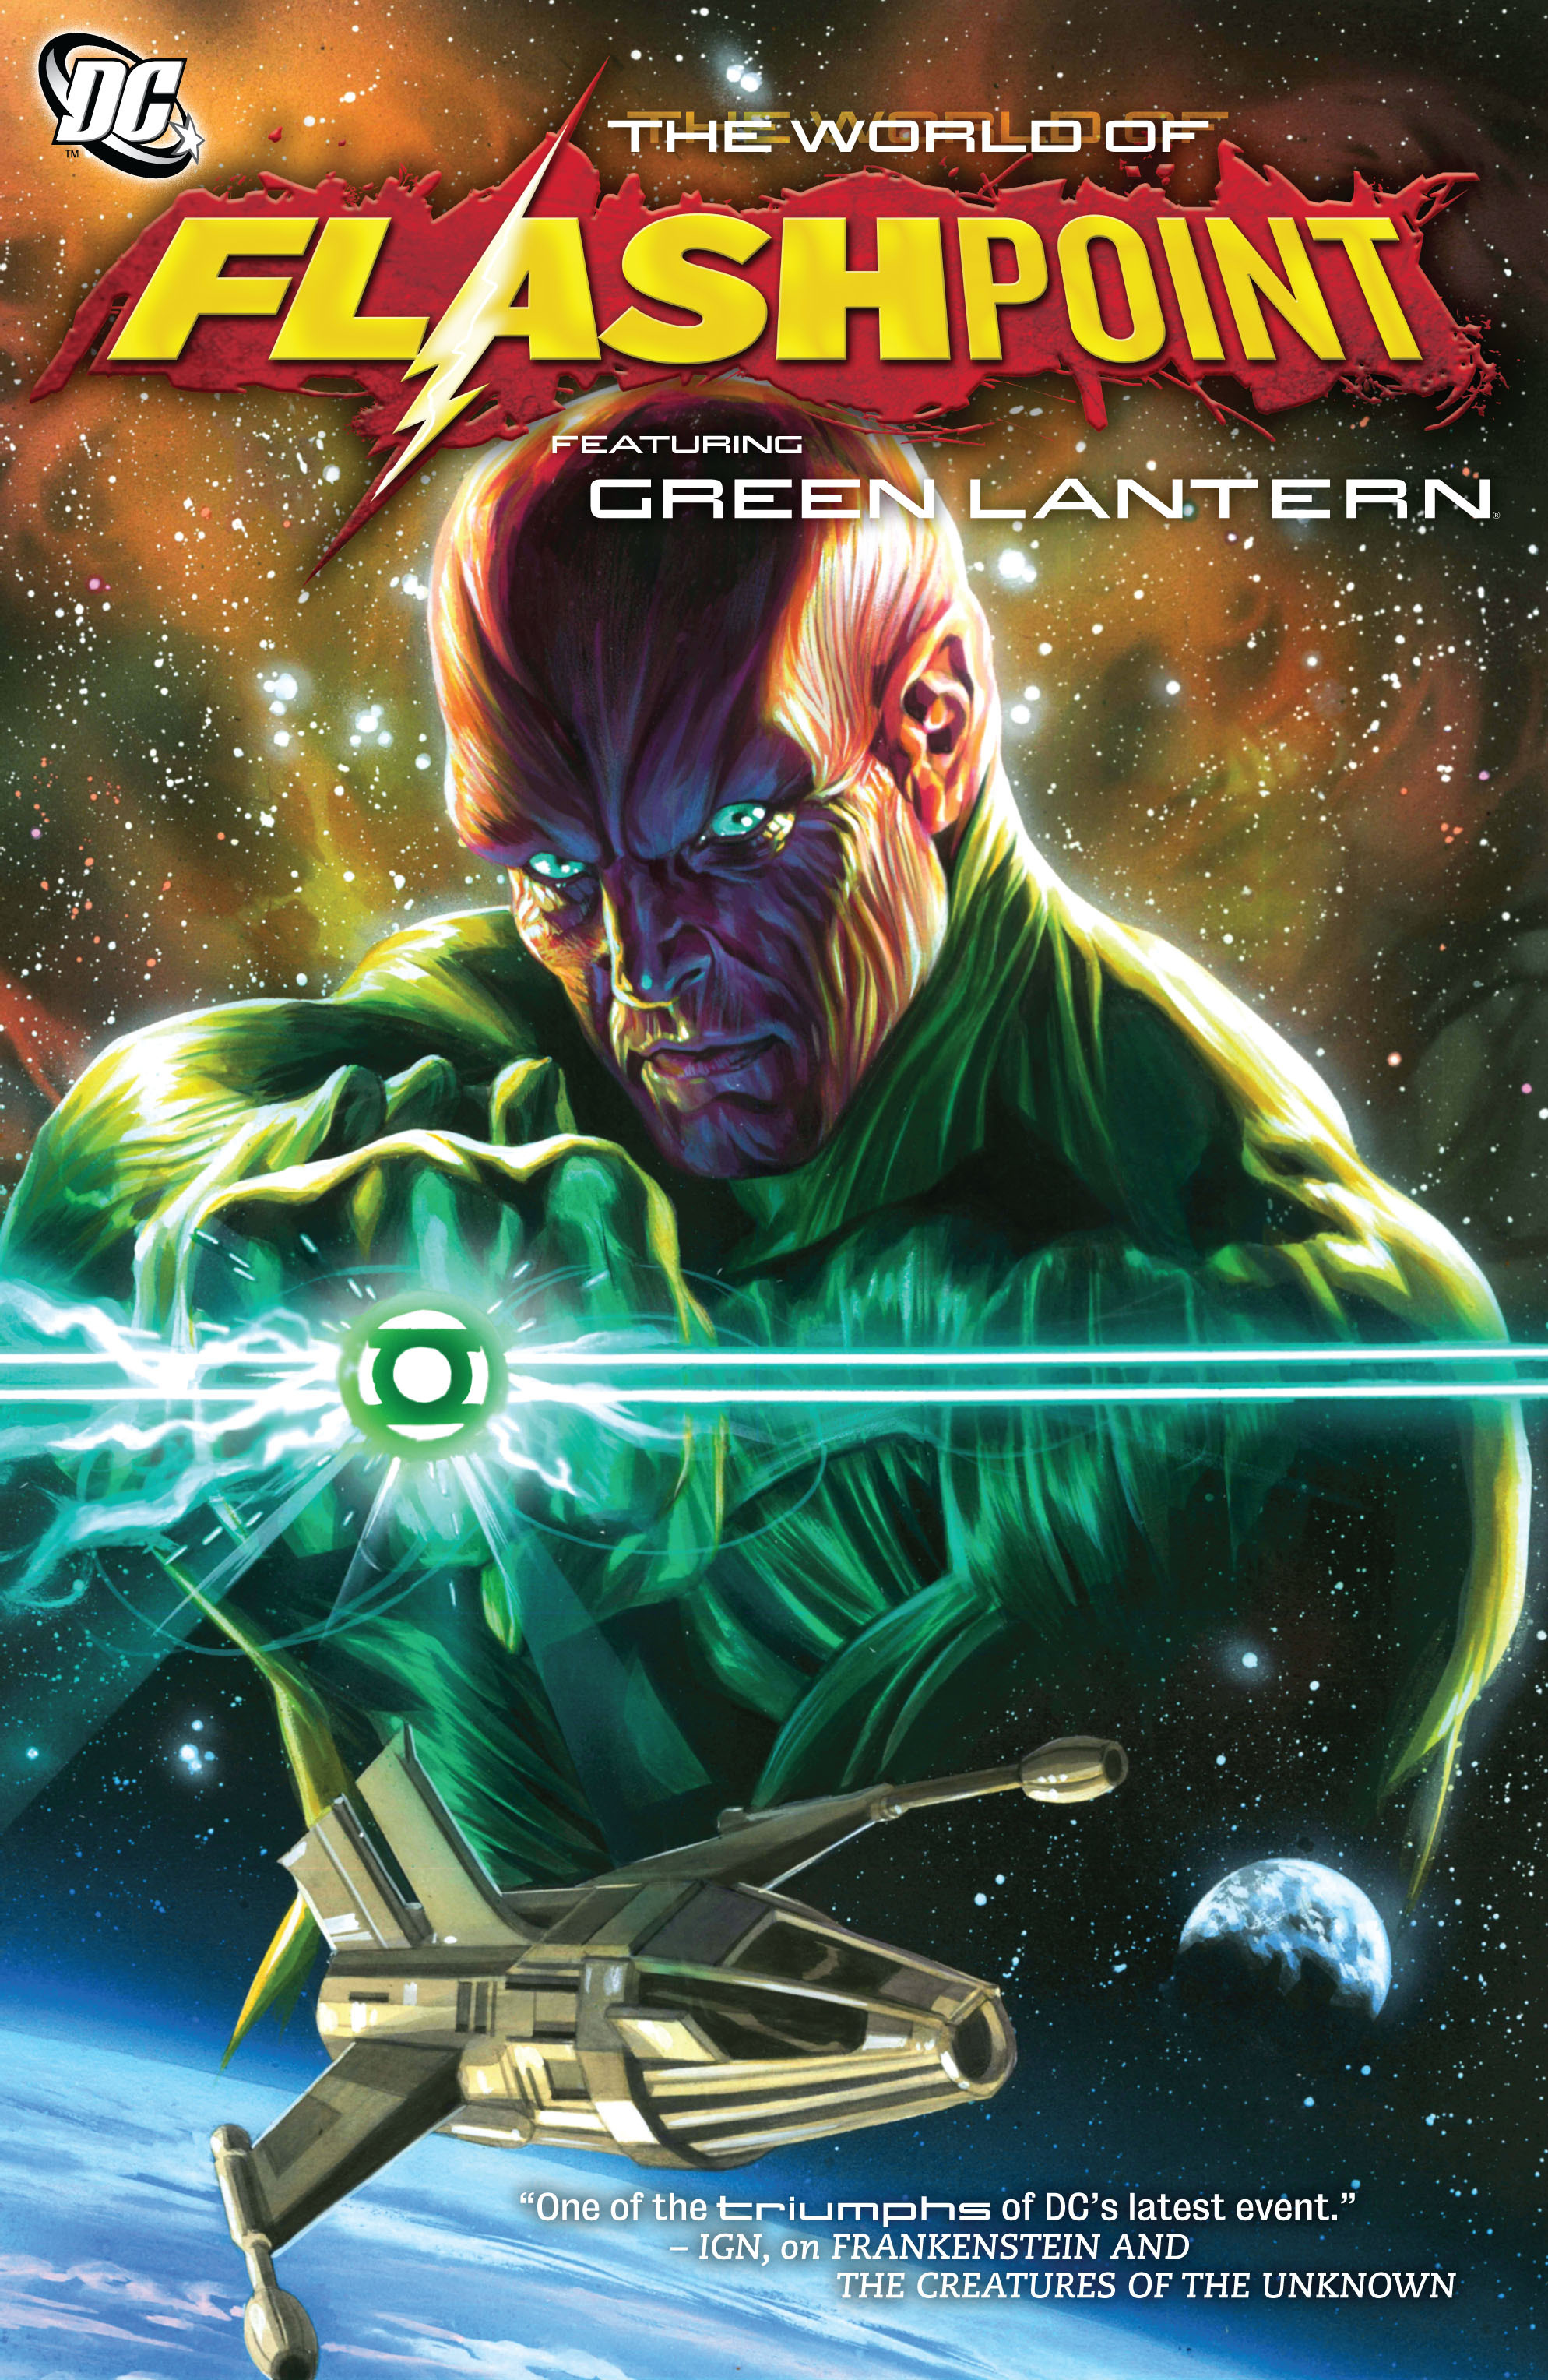 Flashpoint: The World of Flashpoint Featuring Green Lantern Full #1 - English 1